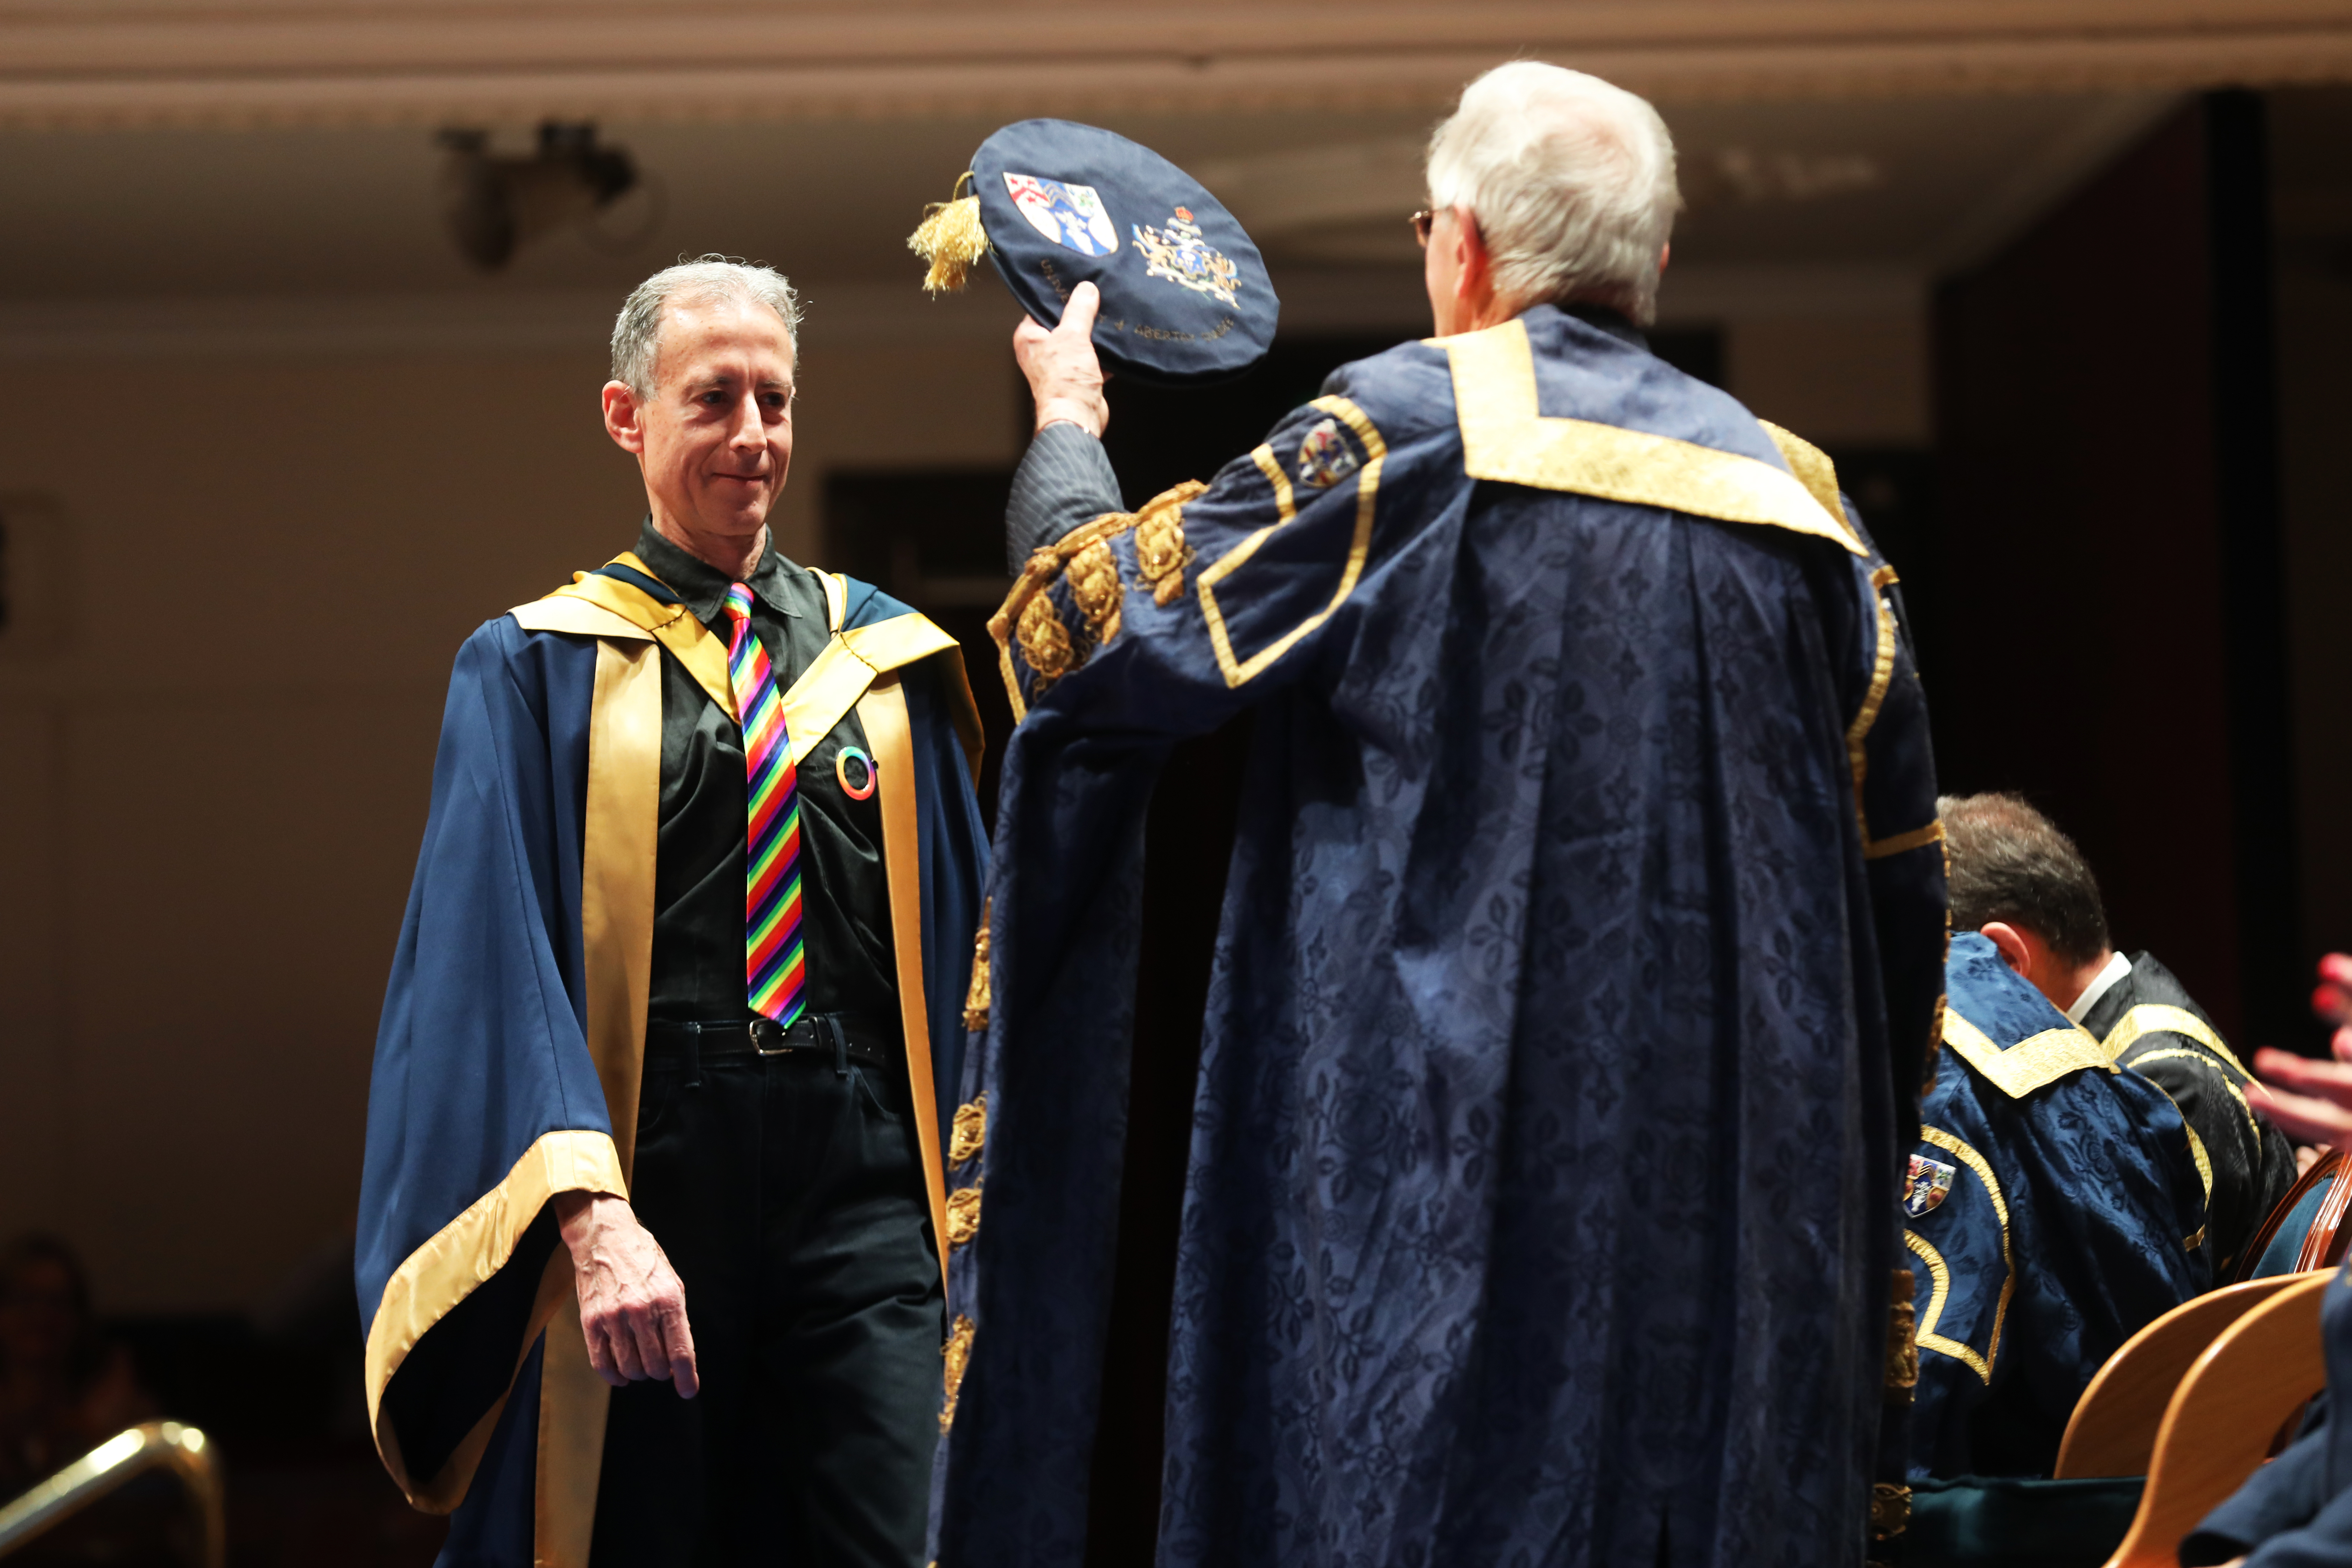 Peter Tatchell getting his honorary degree.